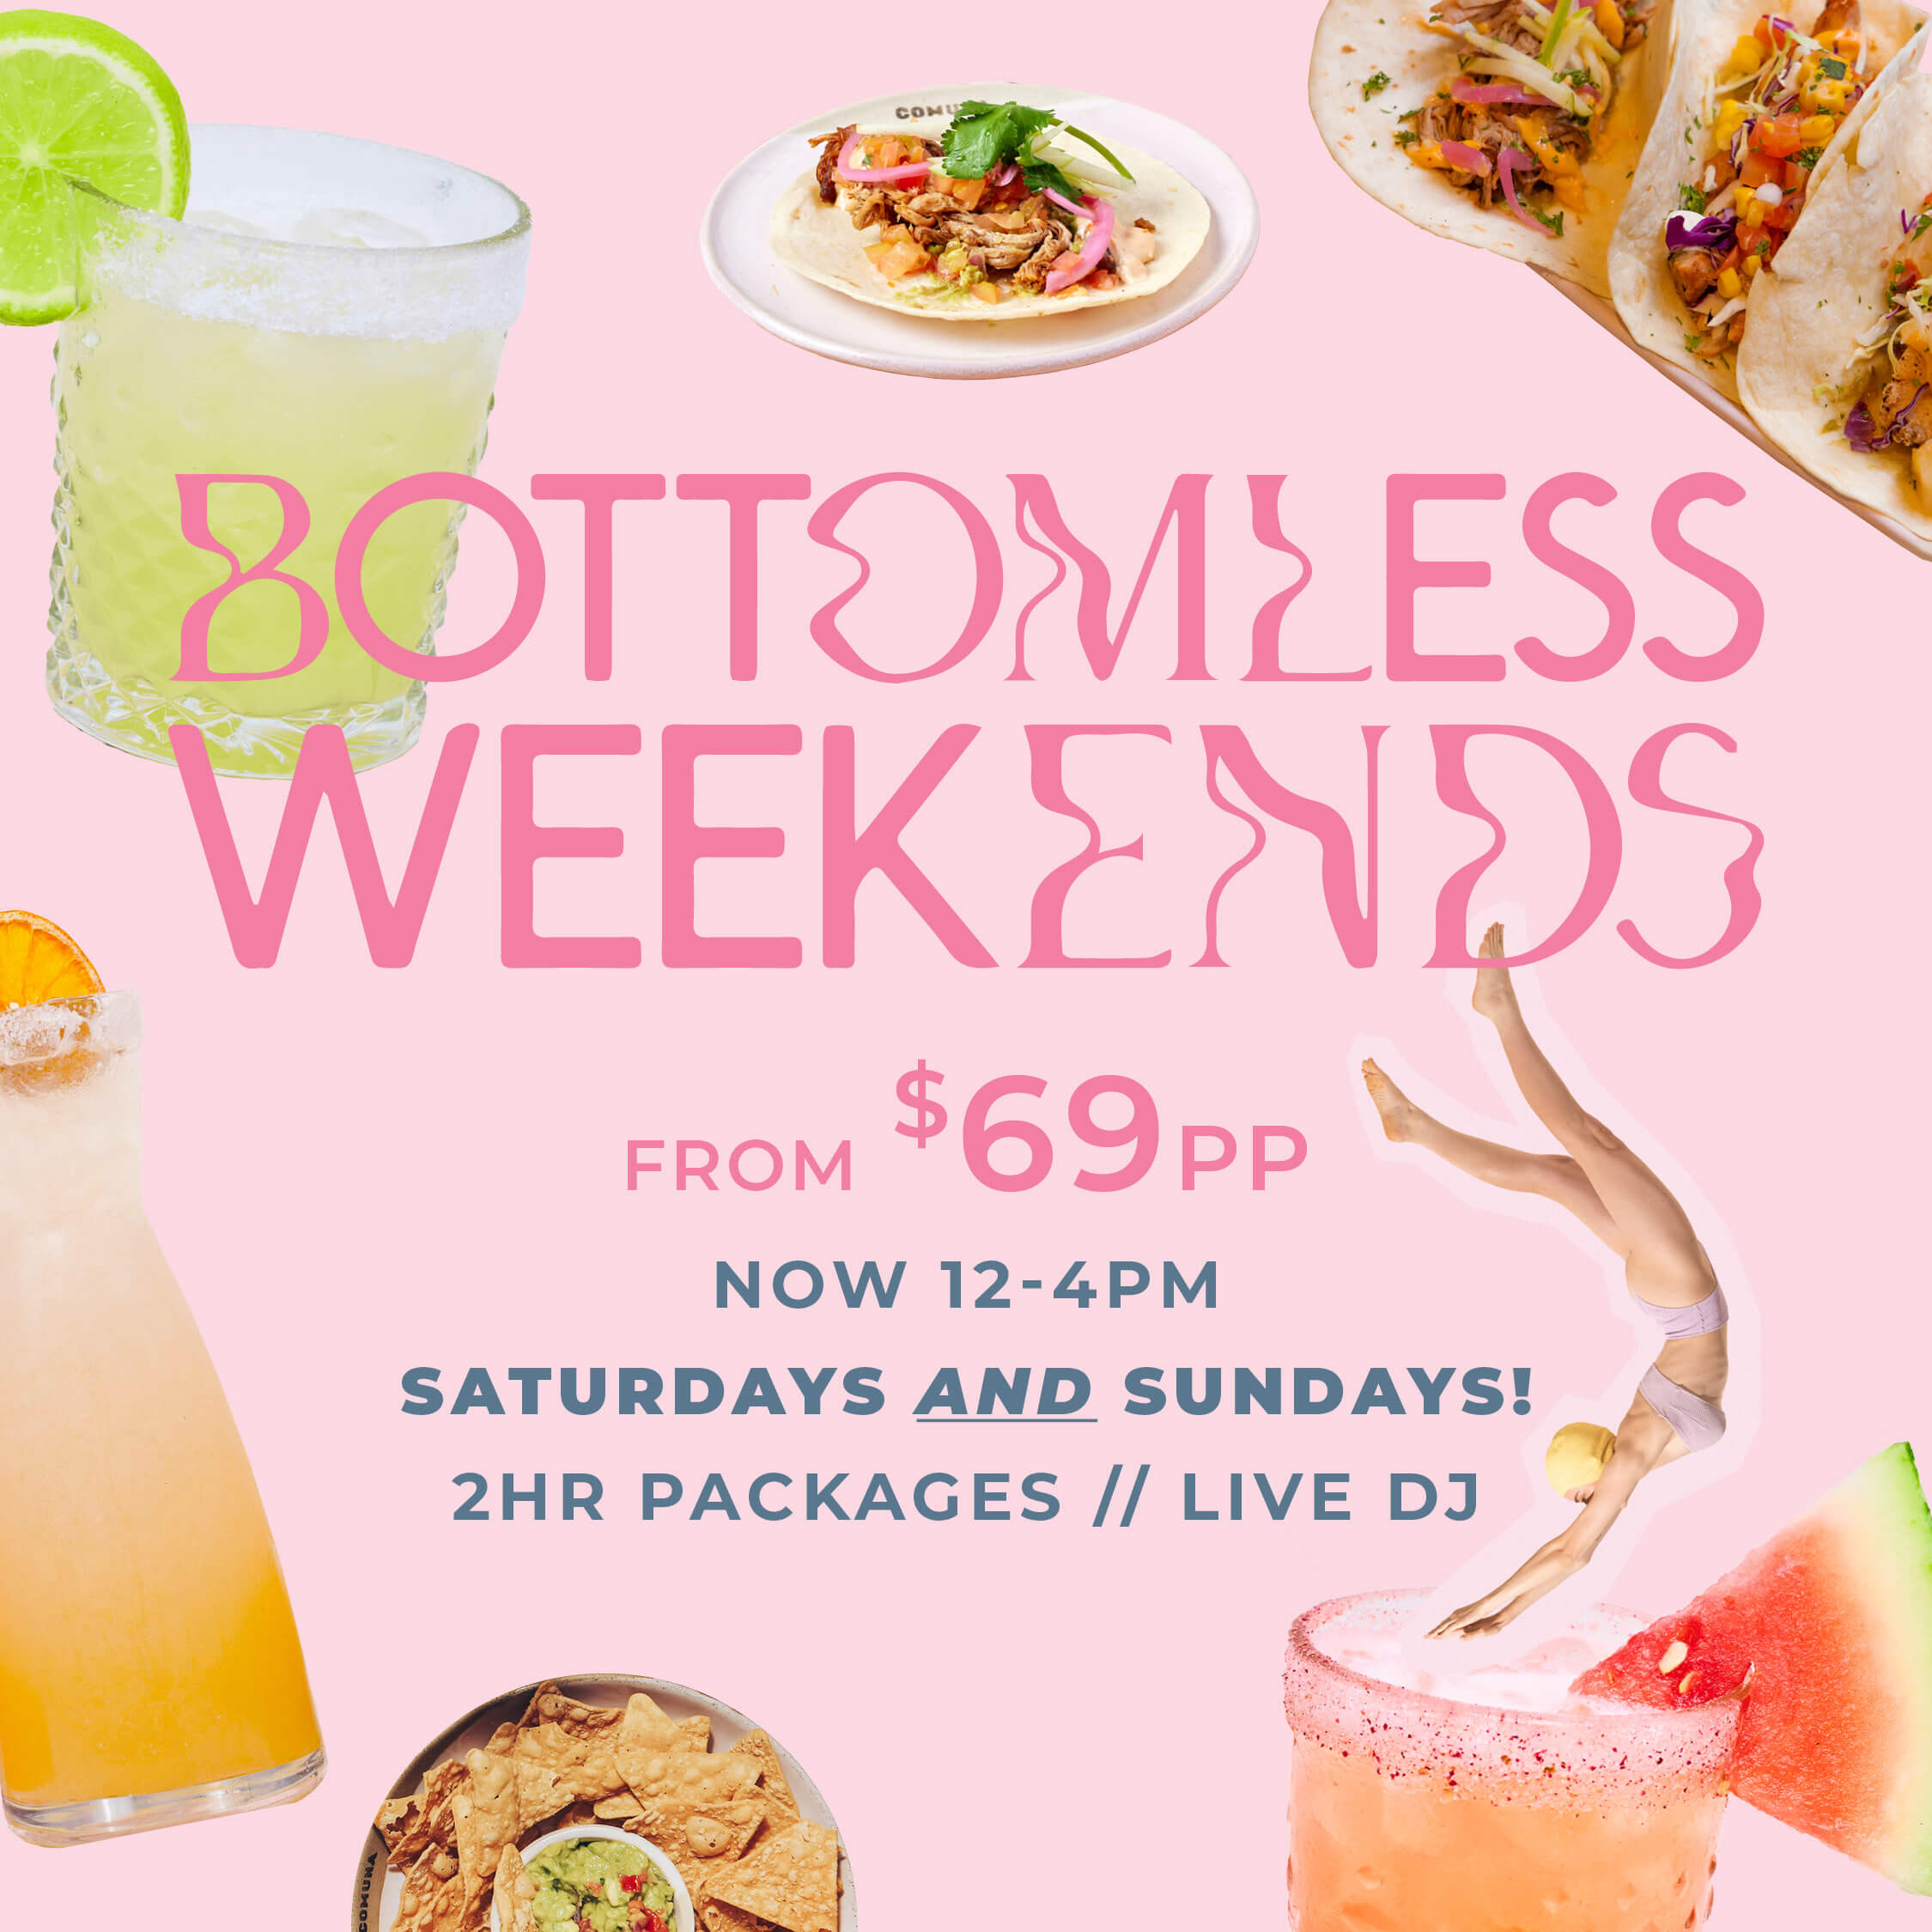 Featured Image For: Bottomless Weekends at…